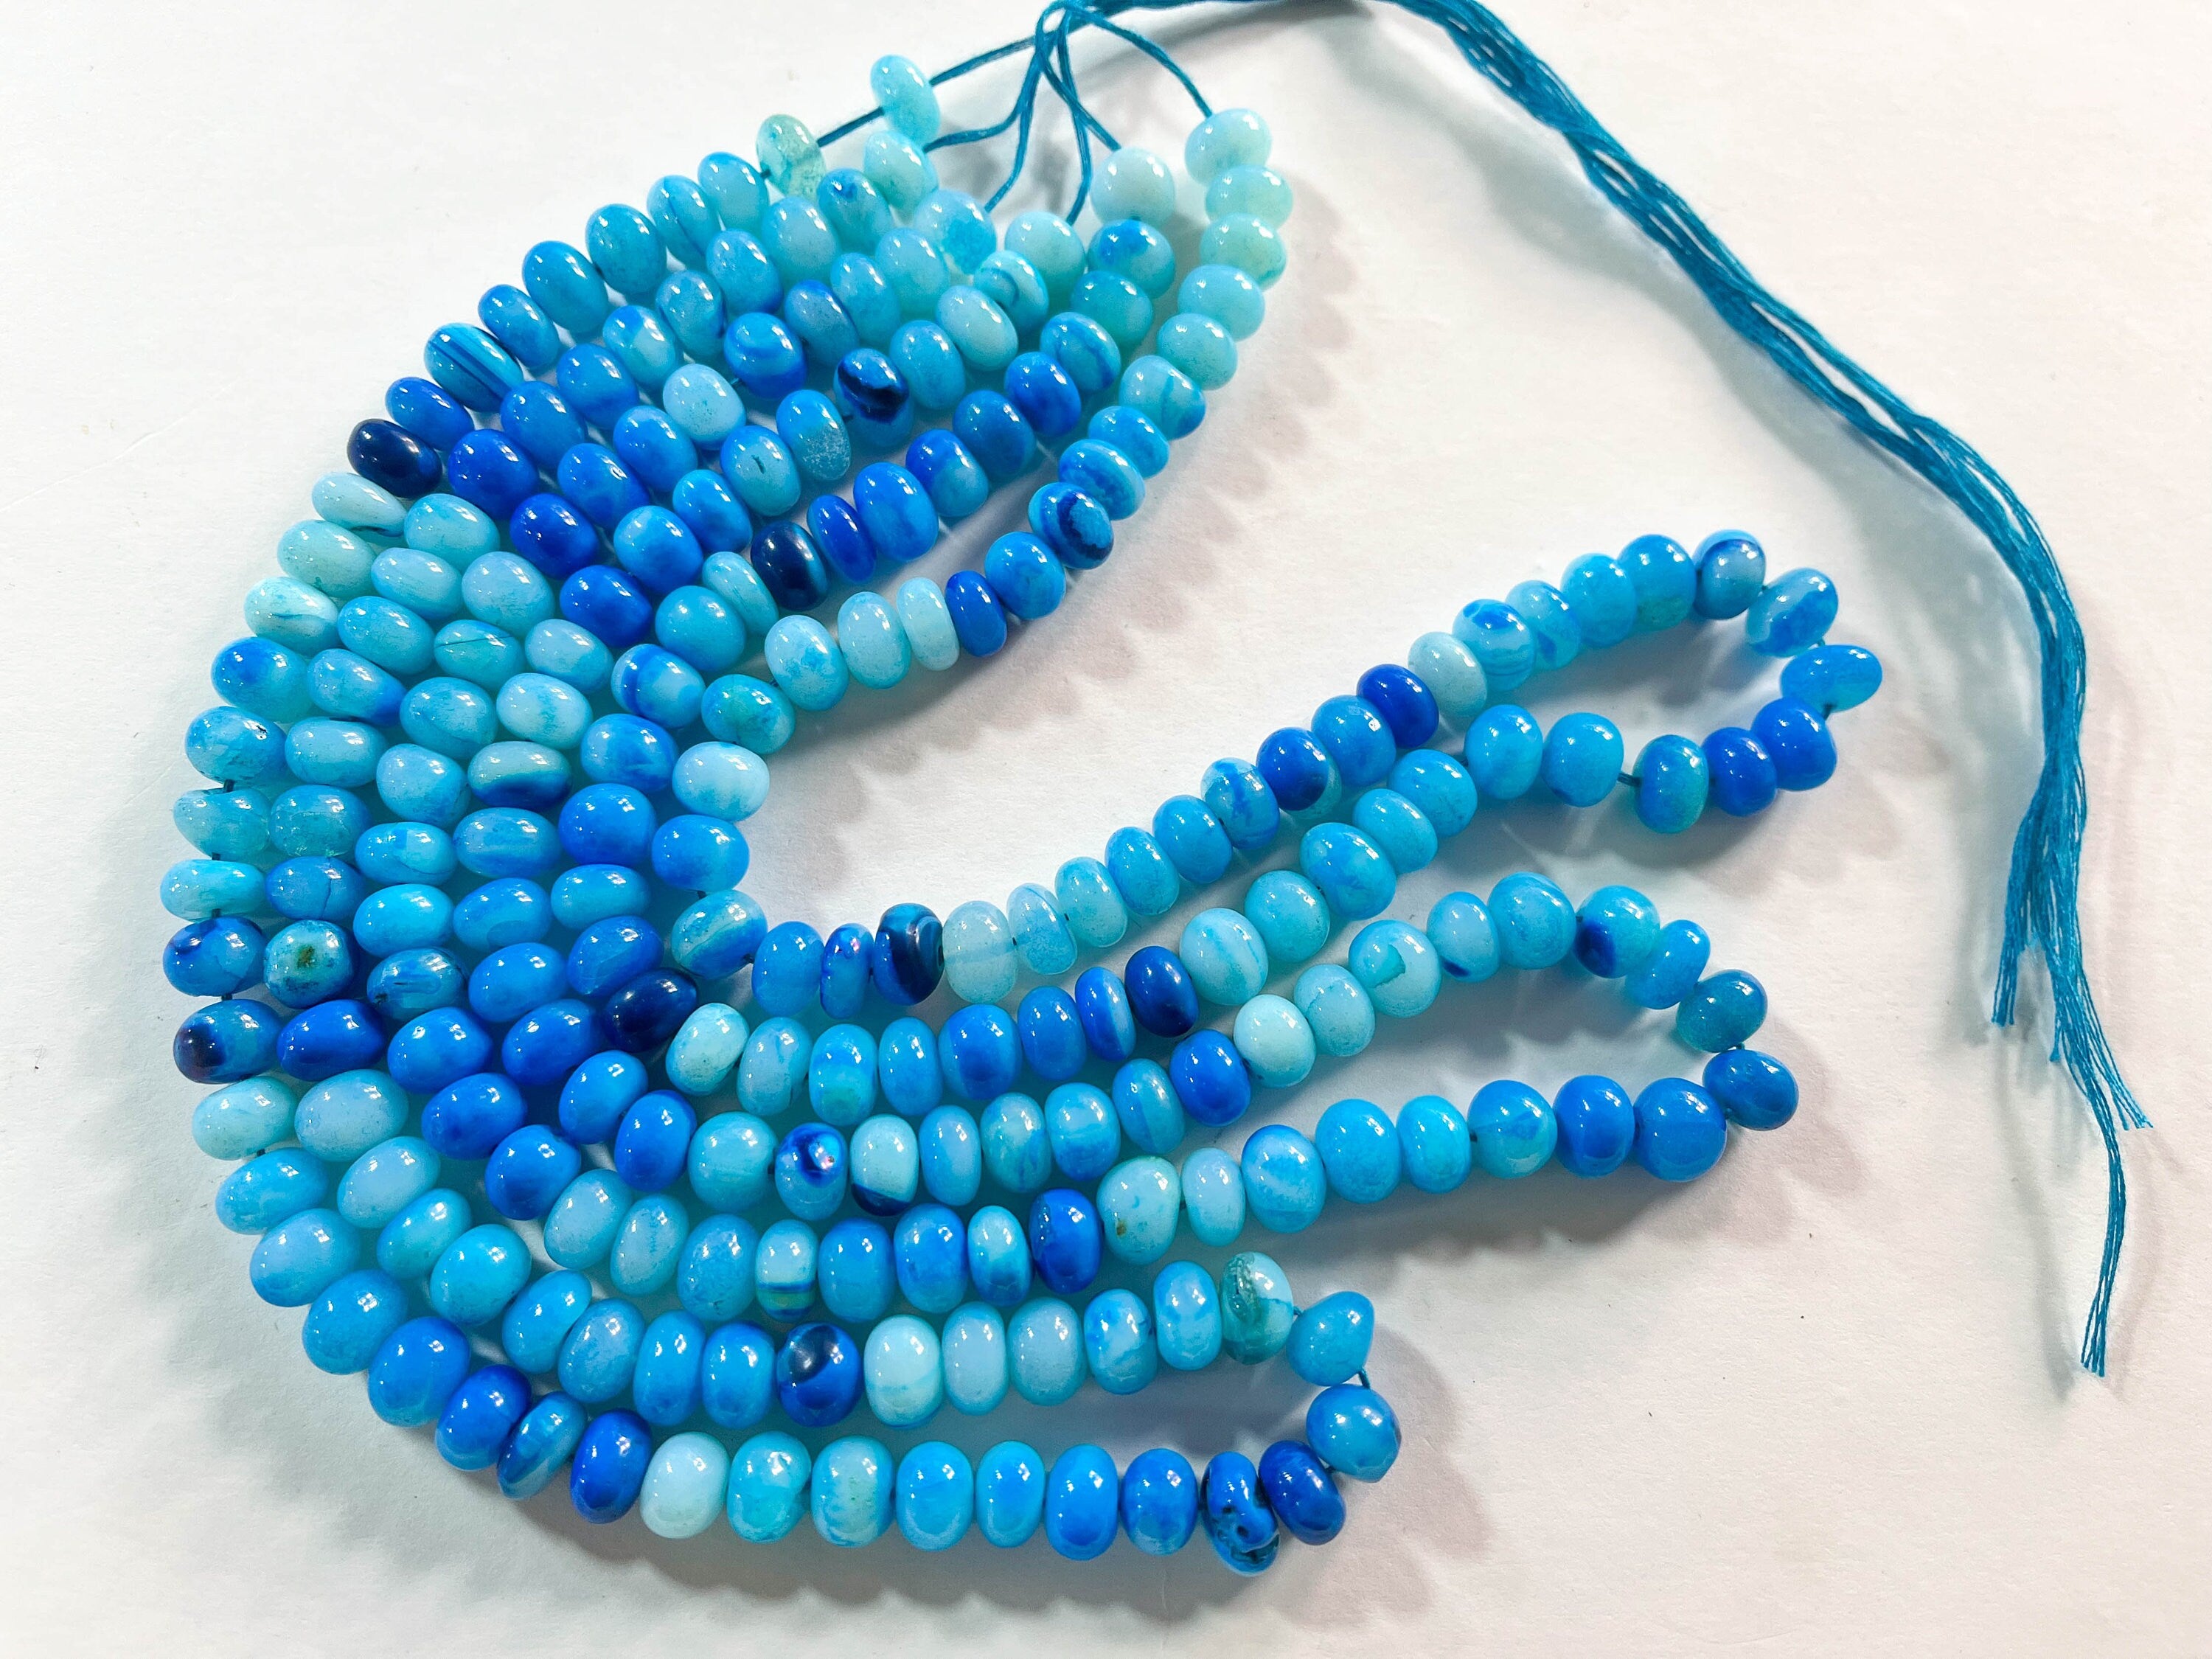 Beautiful Neon Blue Opal Smooth Rondelle Shape Beads - Beadsforyourjewelry